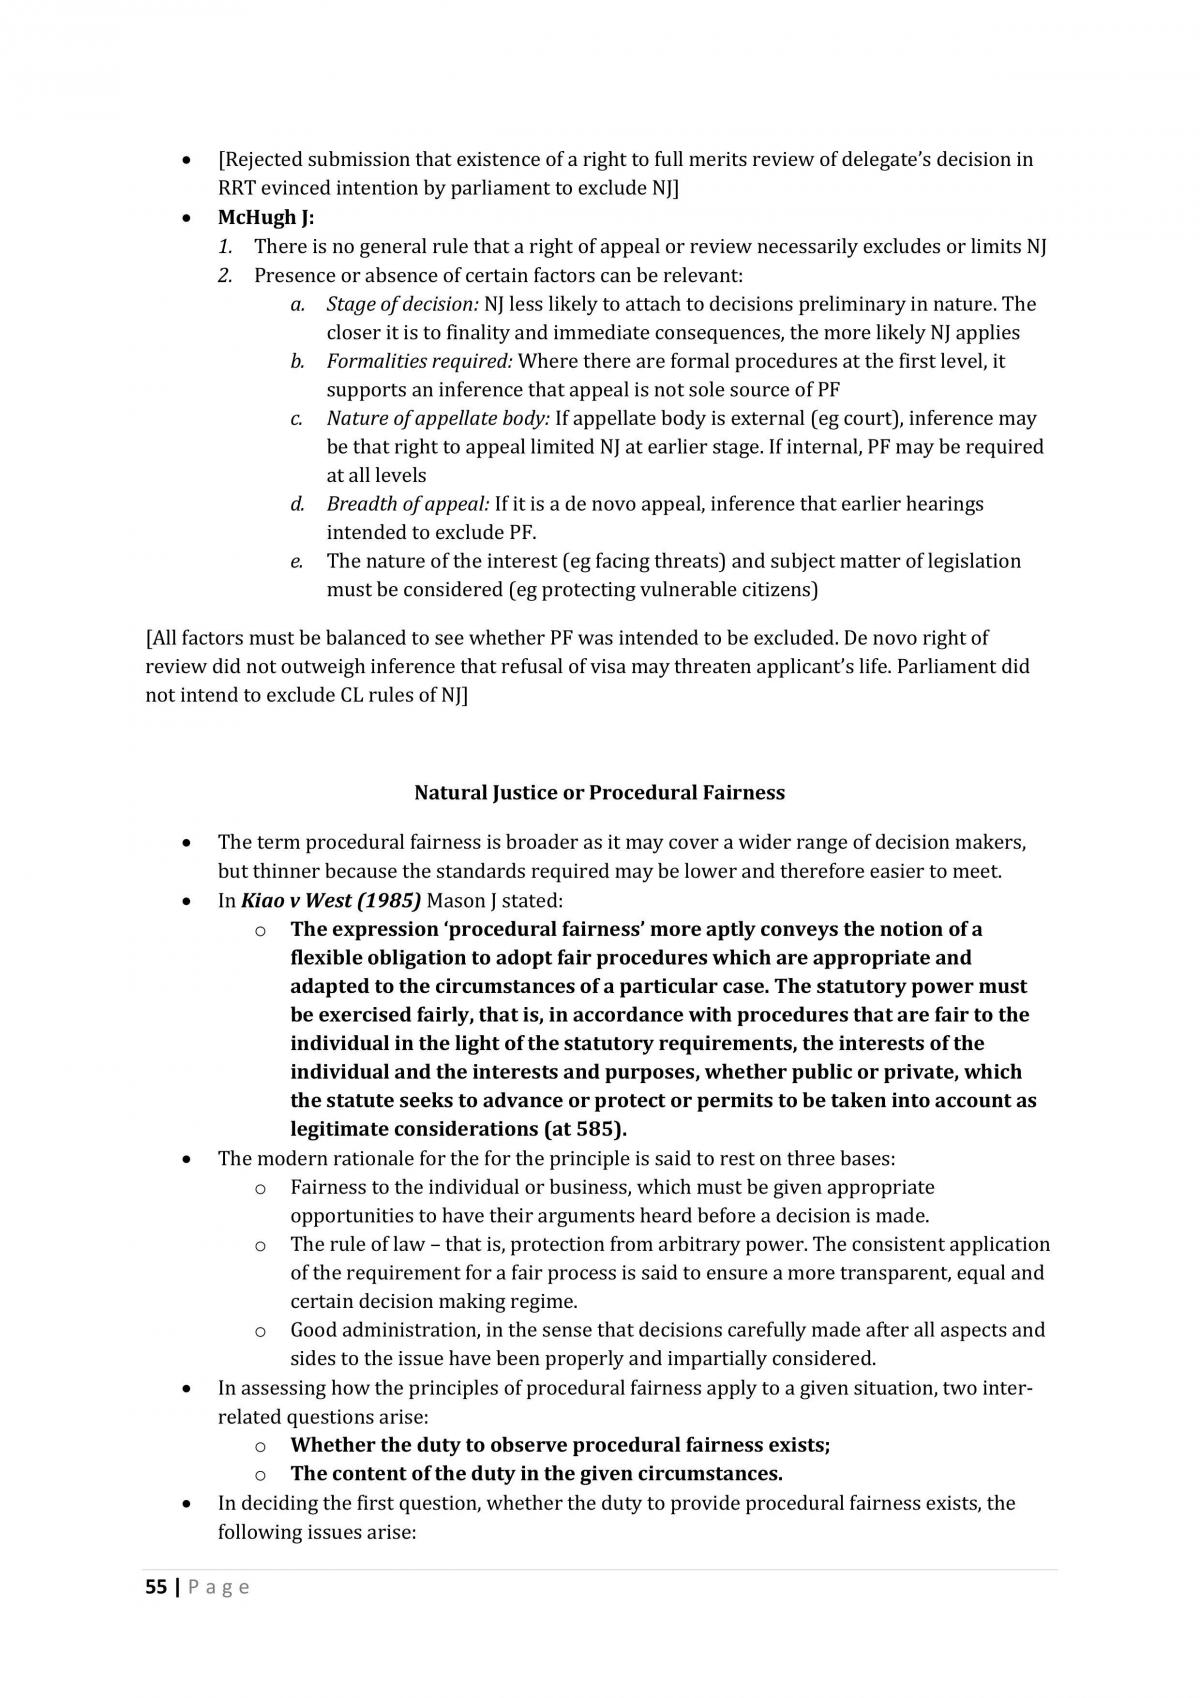 200013 Complete Notes for Final - Page 55